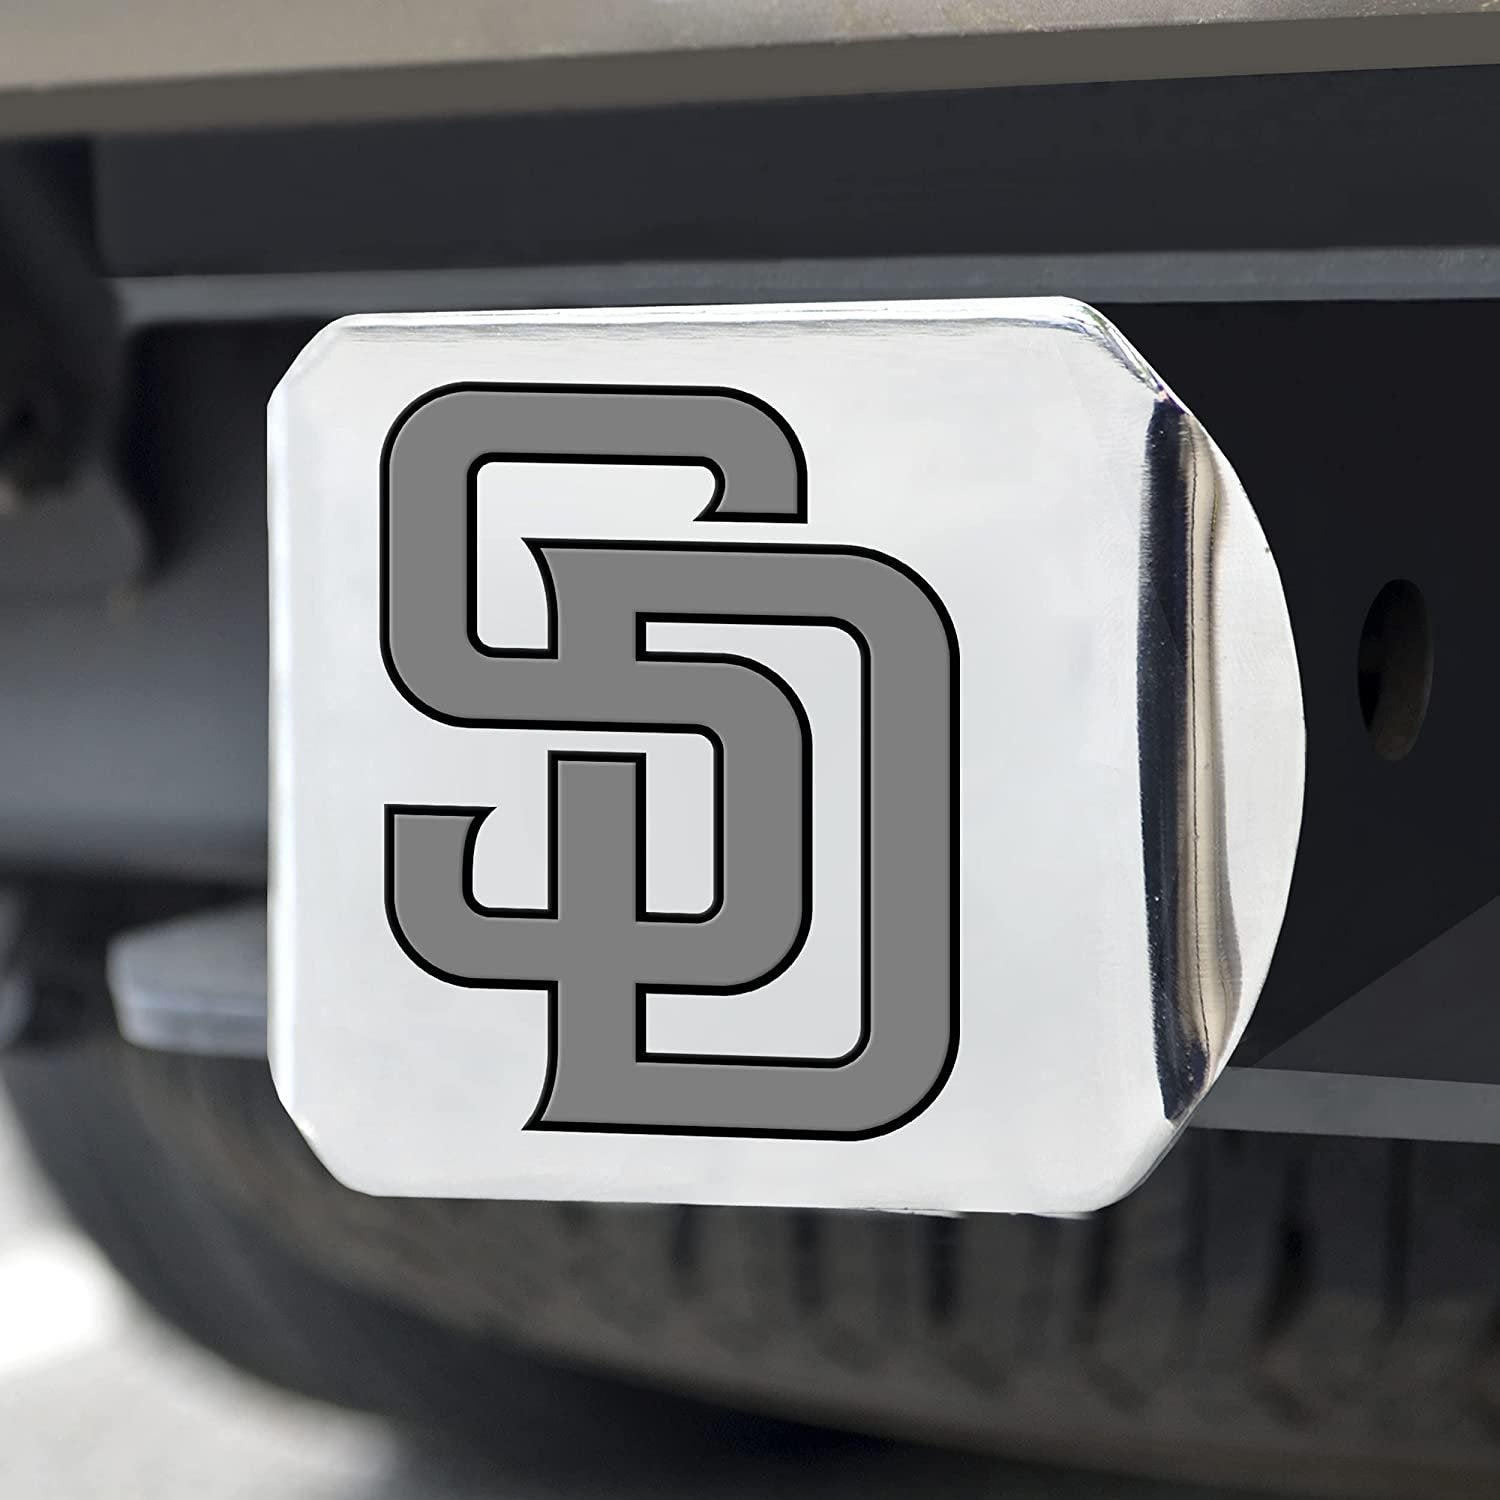 San Diego Padres Hitch Cover Solid Metal with Raised Chrome Metal Emblem 2" Square Type III